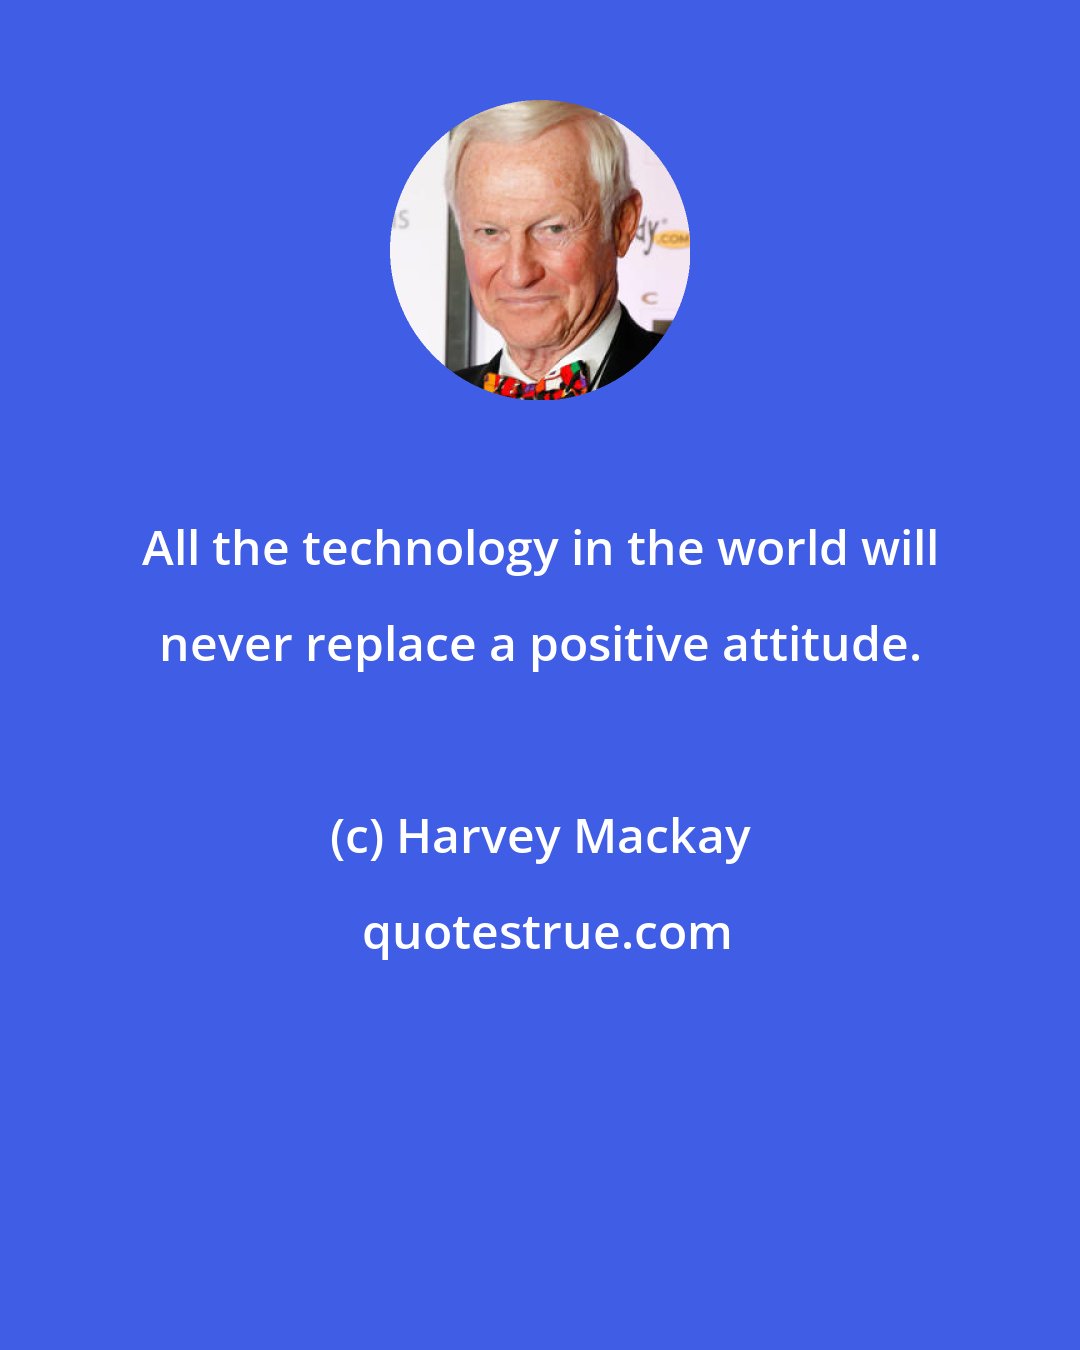 Harvey Mackay: All the technology in the world will never replace a positive attitude.